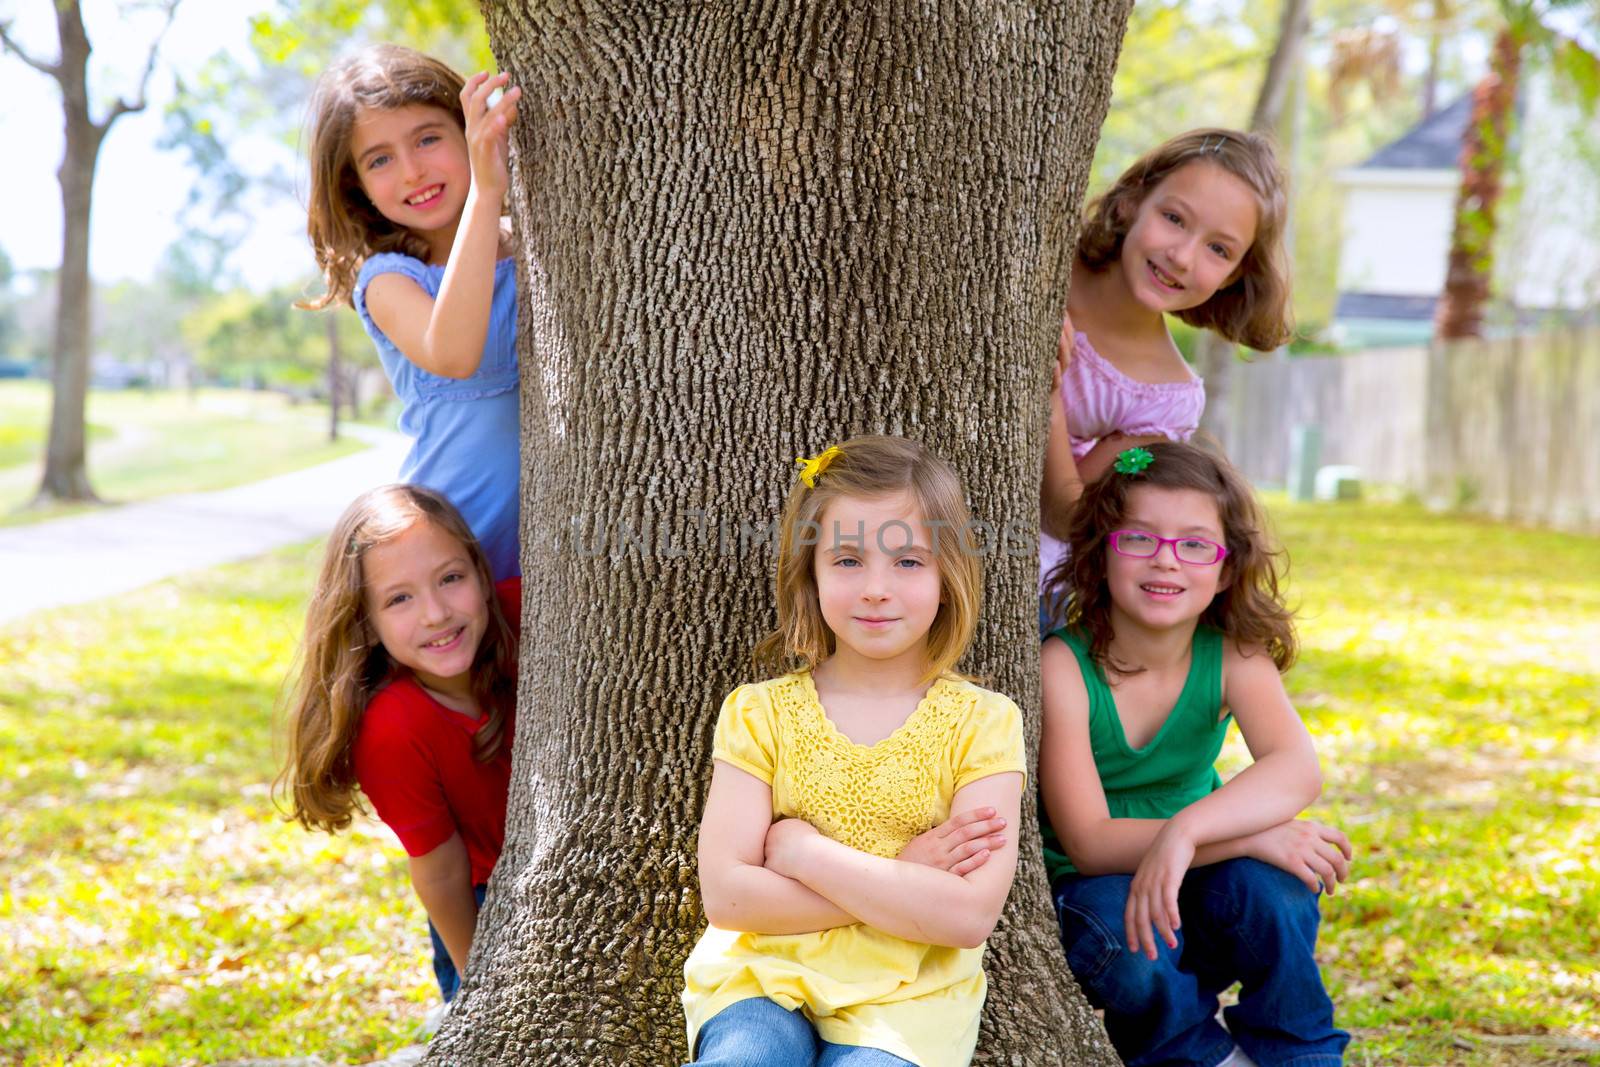 Children group of sisters girls and friends playing on tree trunk at the park outdoor